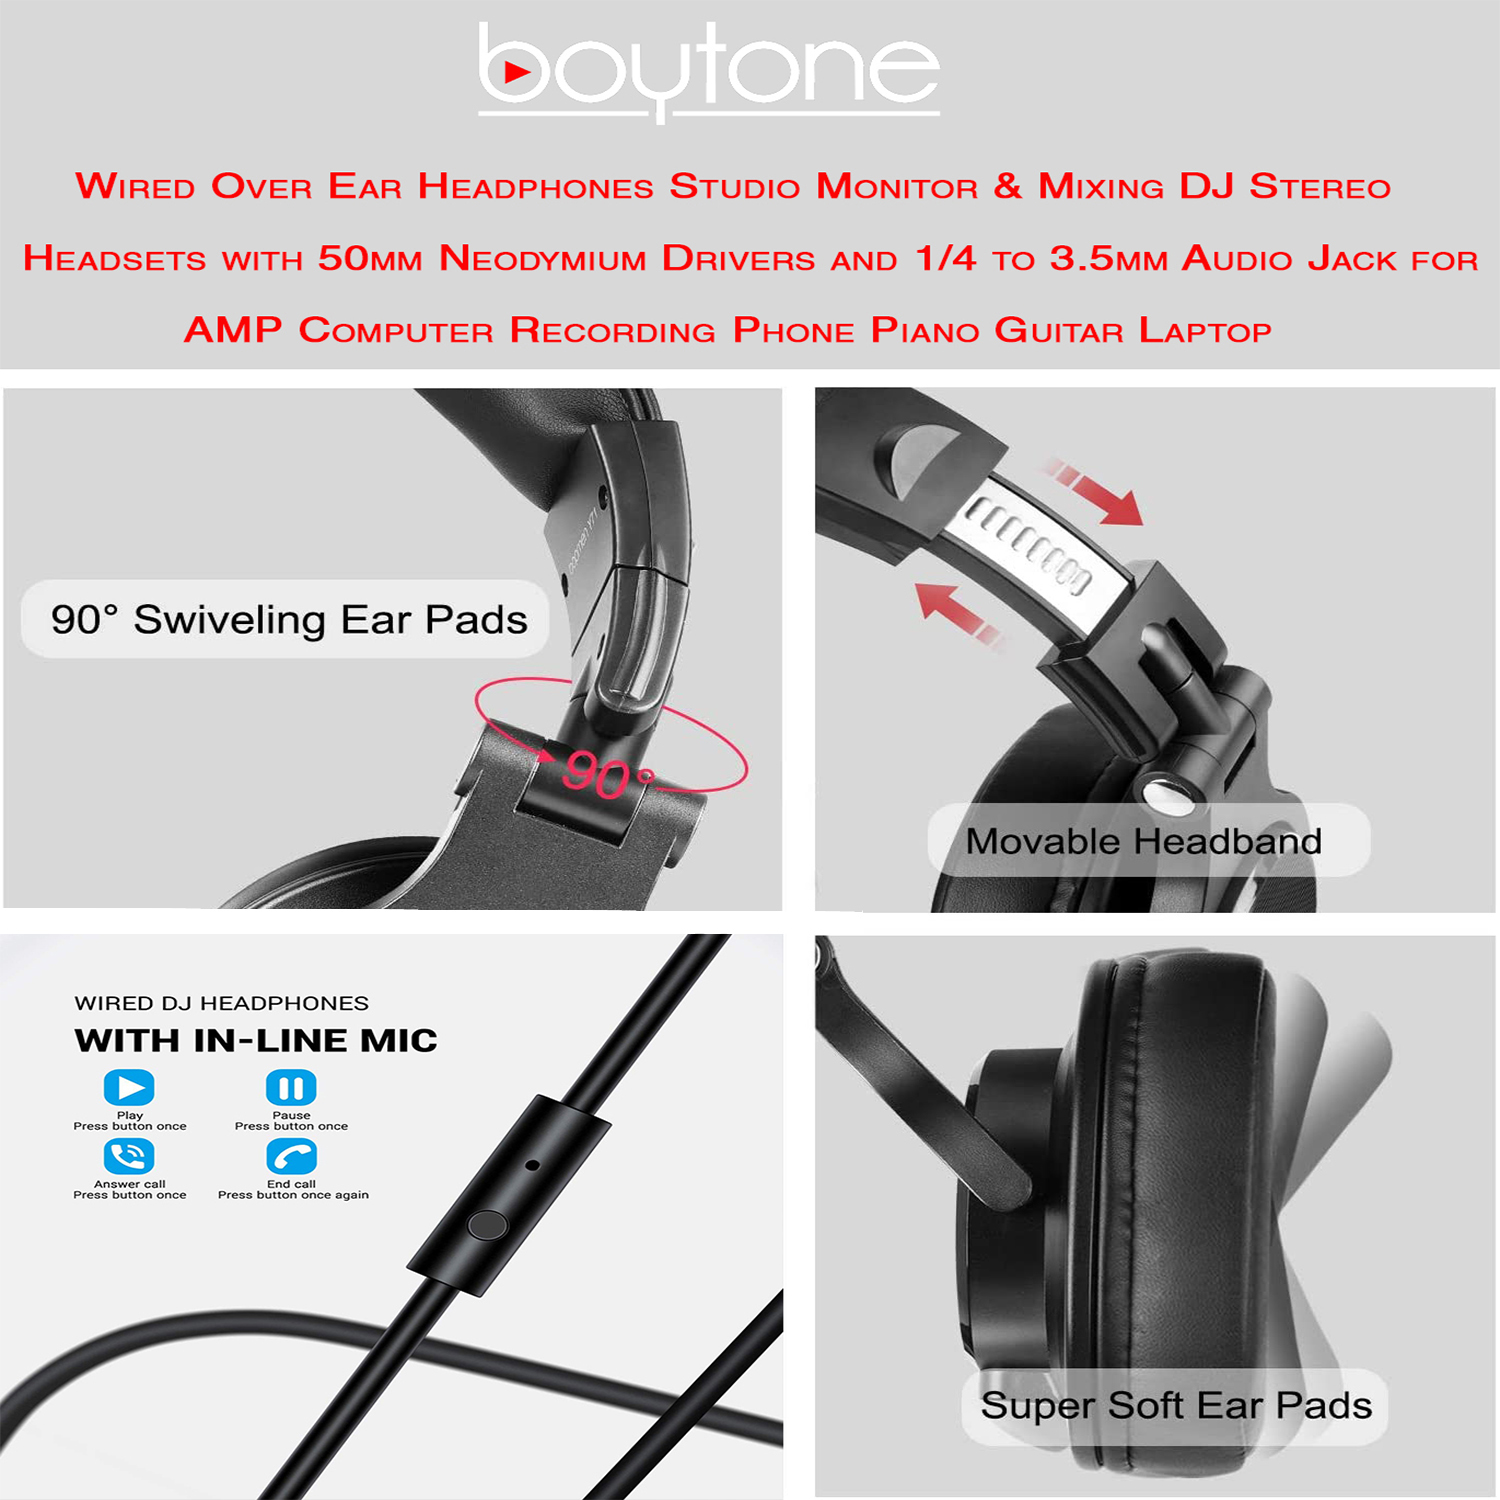 Boytone BT-10RD Wired Over Ear Headphones Studio Monitor & Mixing DJ Stereo Headsets with 50mm Drivers